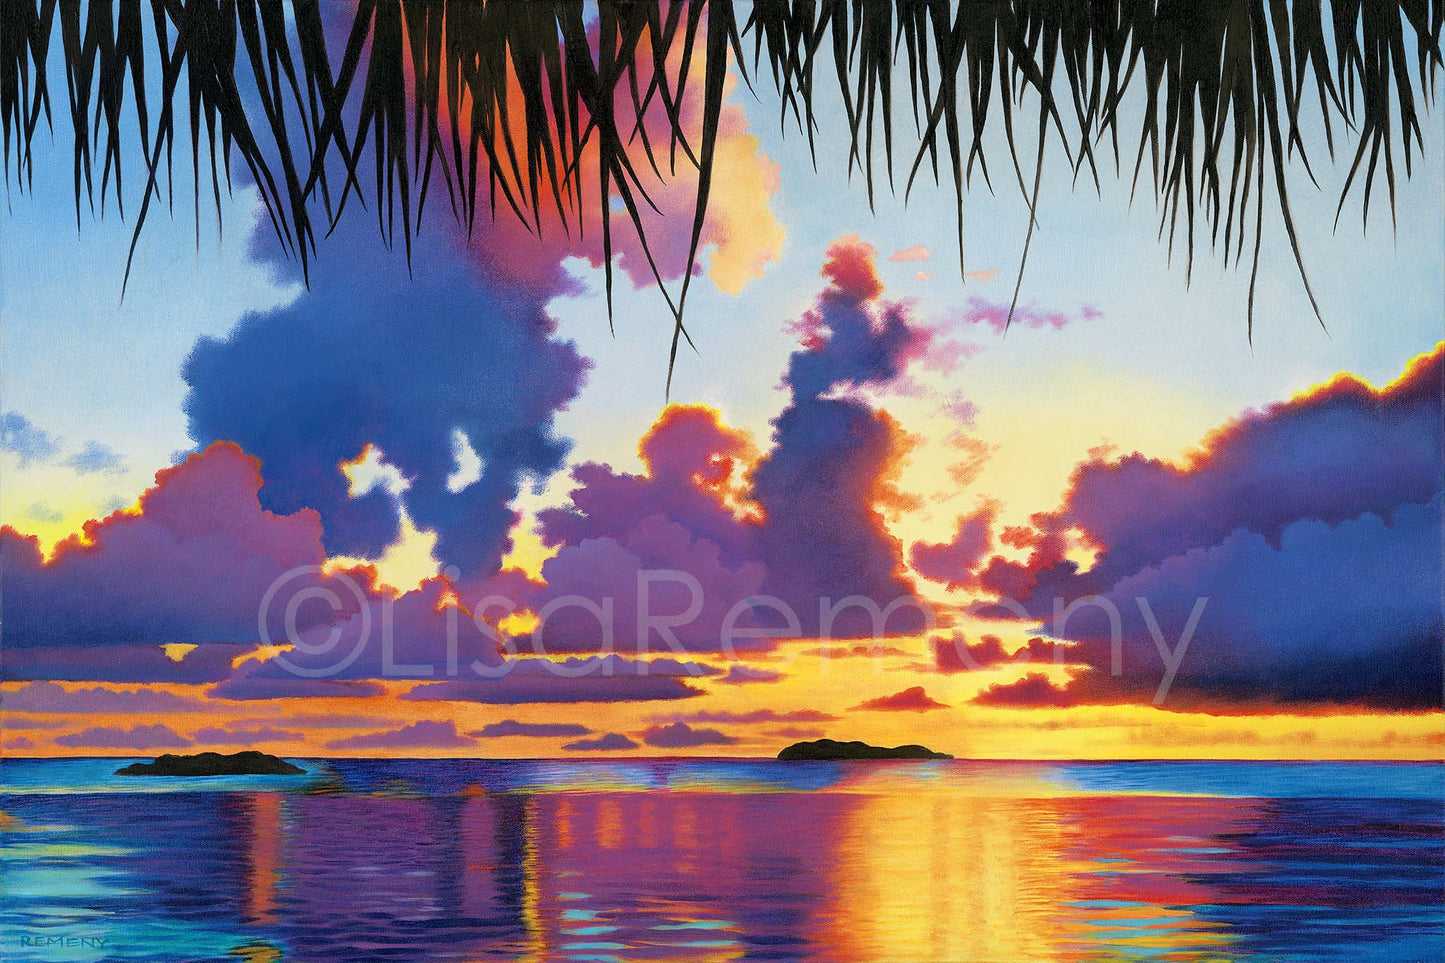 Giclée - Almost Night Again